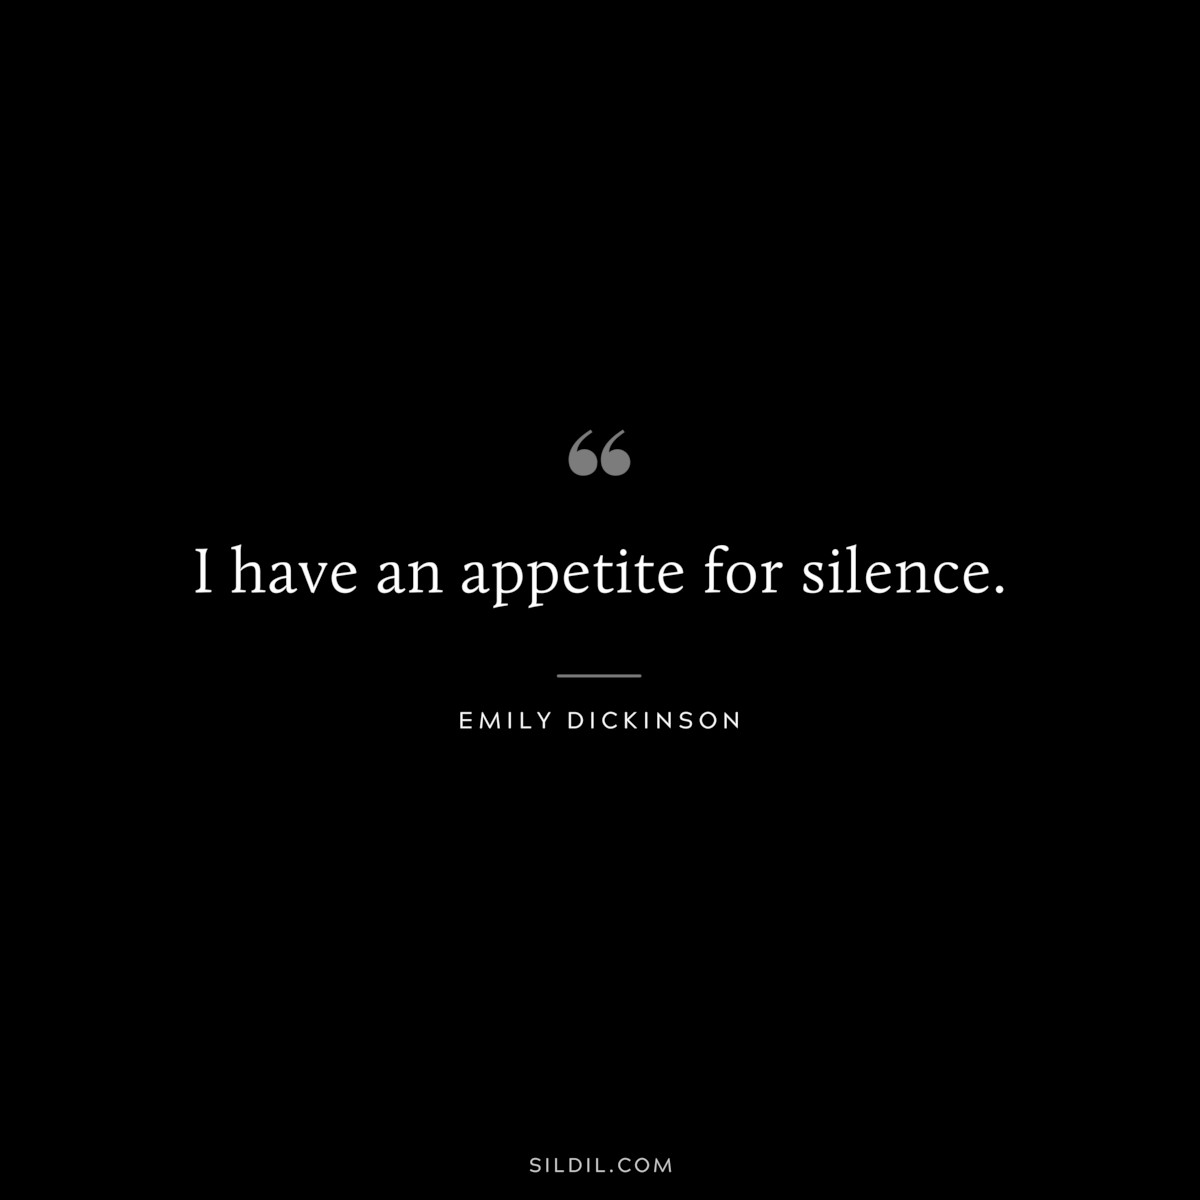 I have an appetite for silence.